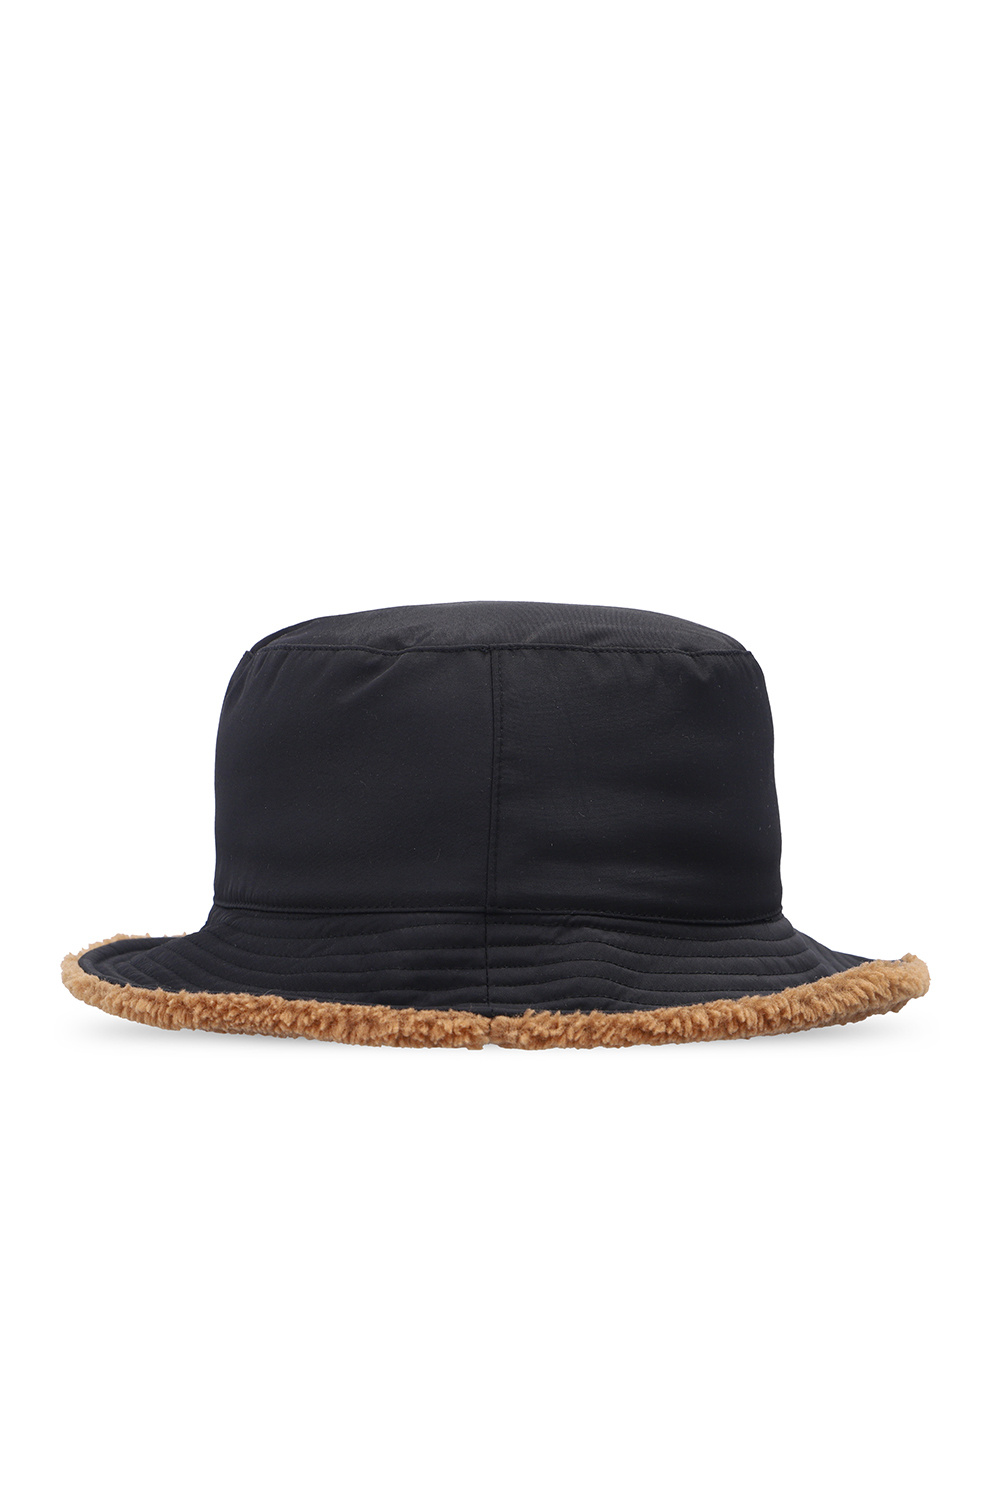 PS Paul Smith Insulated hat